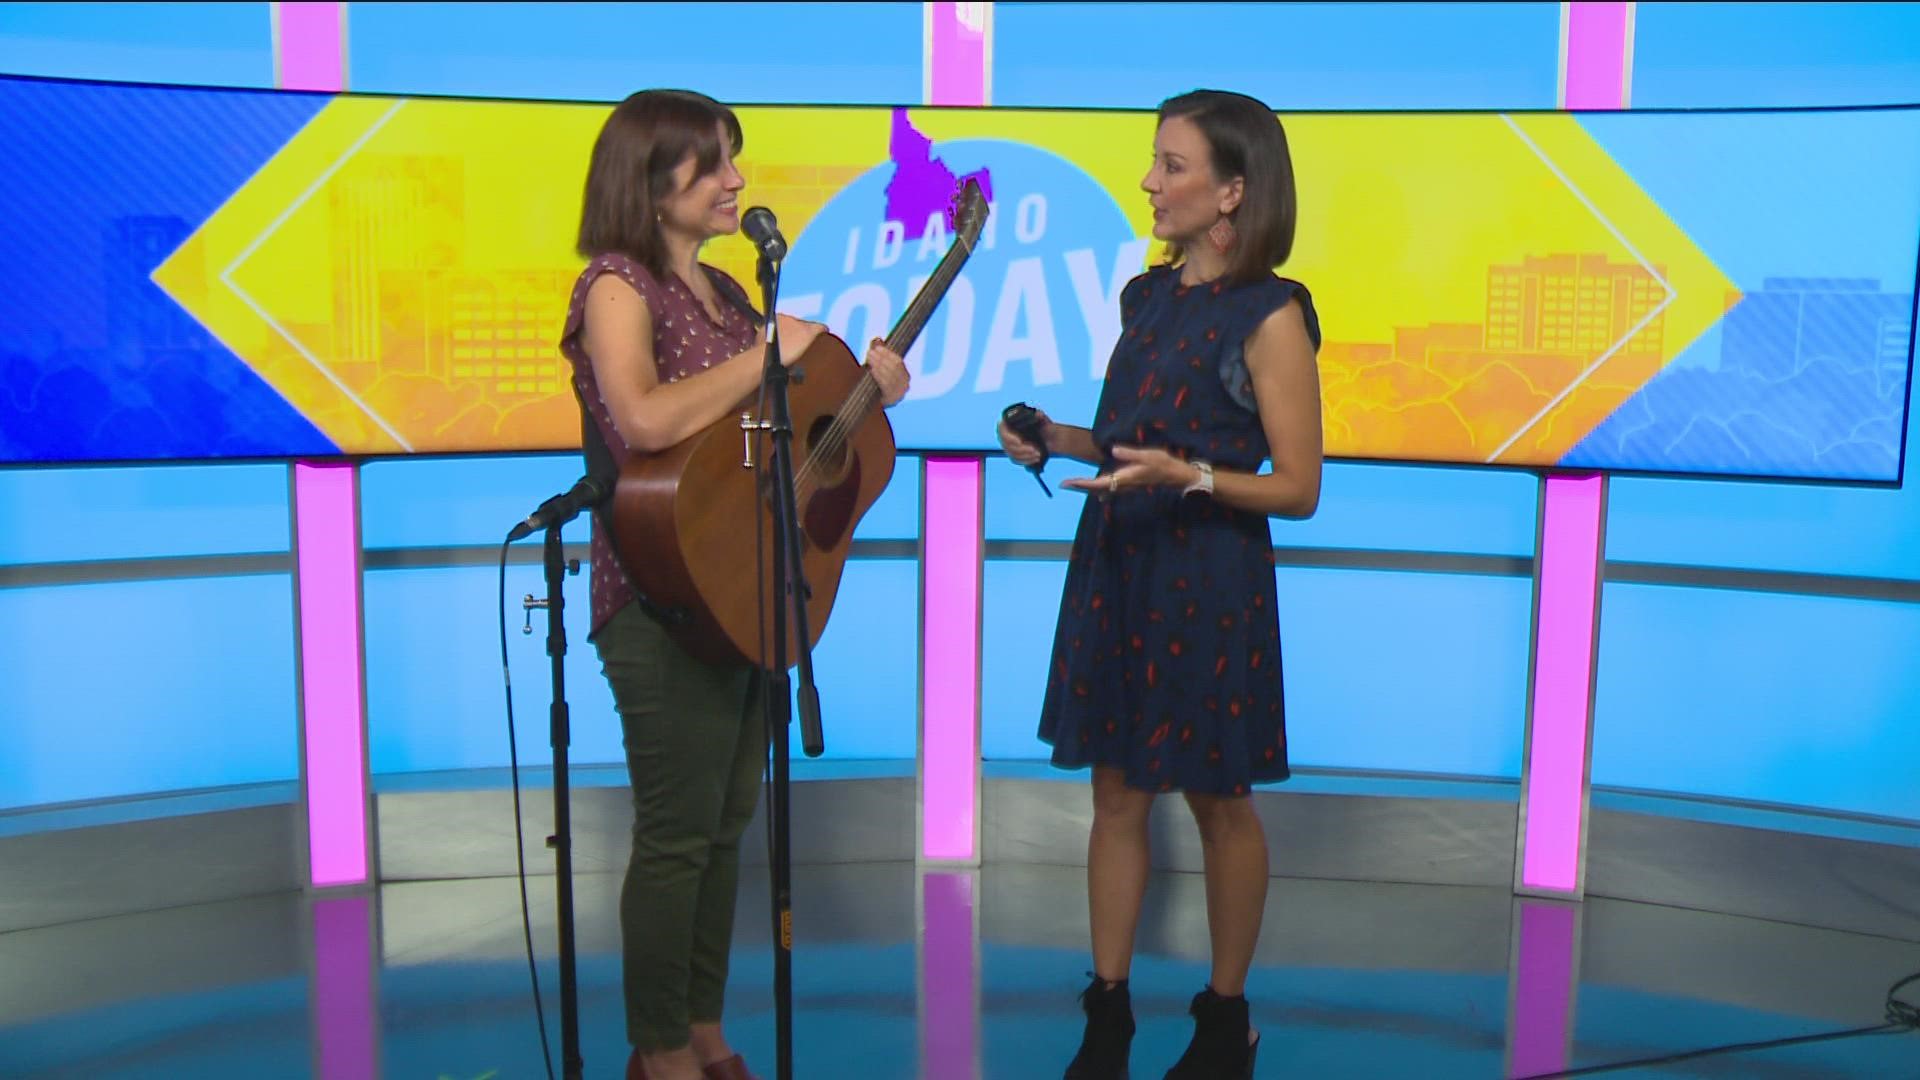 Chelsea Smith from Cactus Moon gives us an acoustic performance in studio, a preview to the Flipside Fest this weekend!